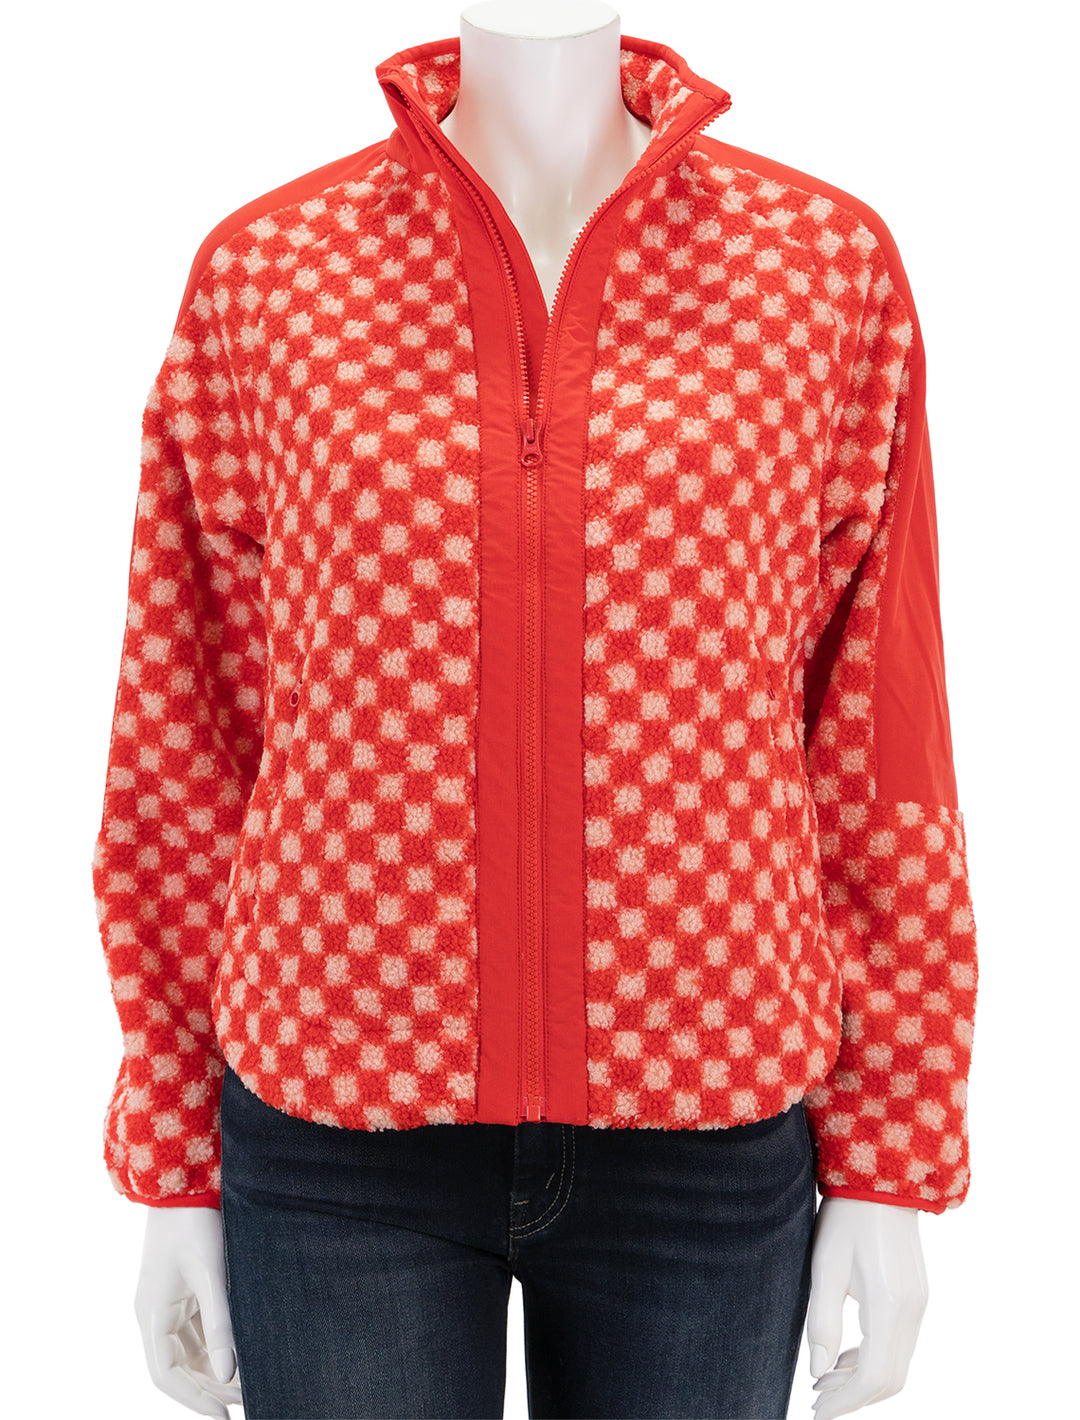 Front view of Marine Layer's blaire sherpa jacket in poinciana checkerboard, zipped.